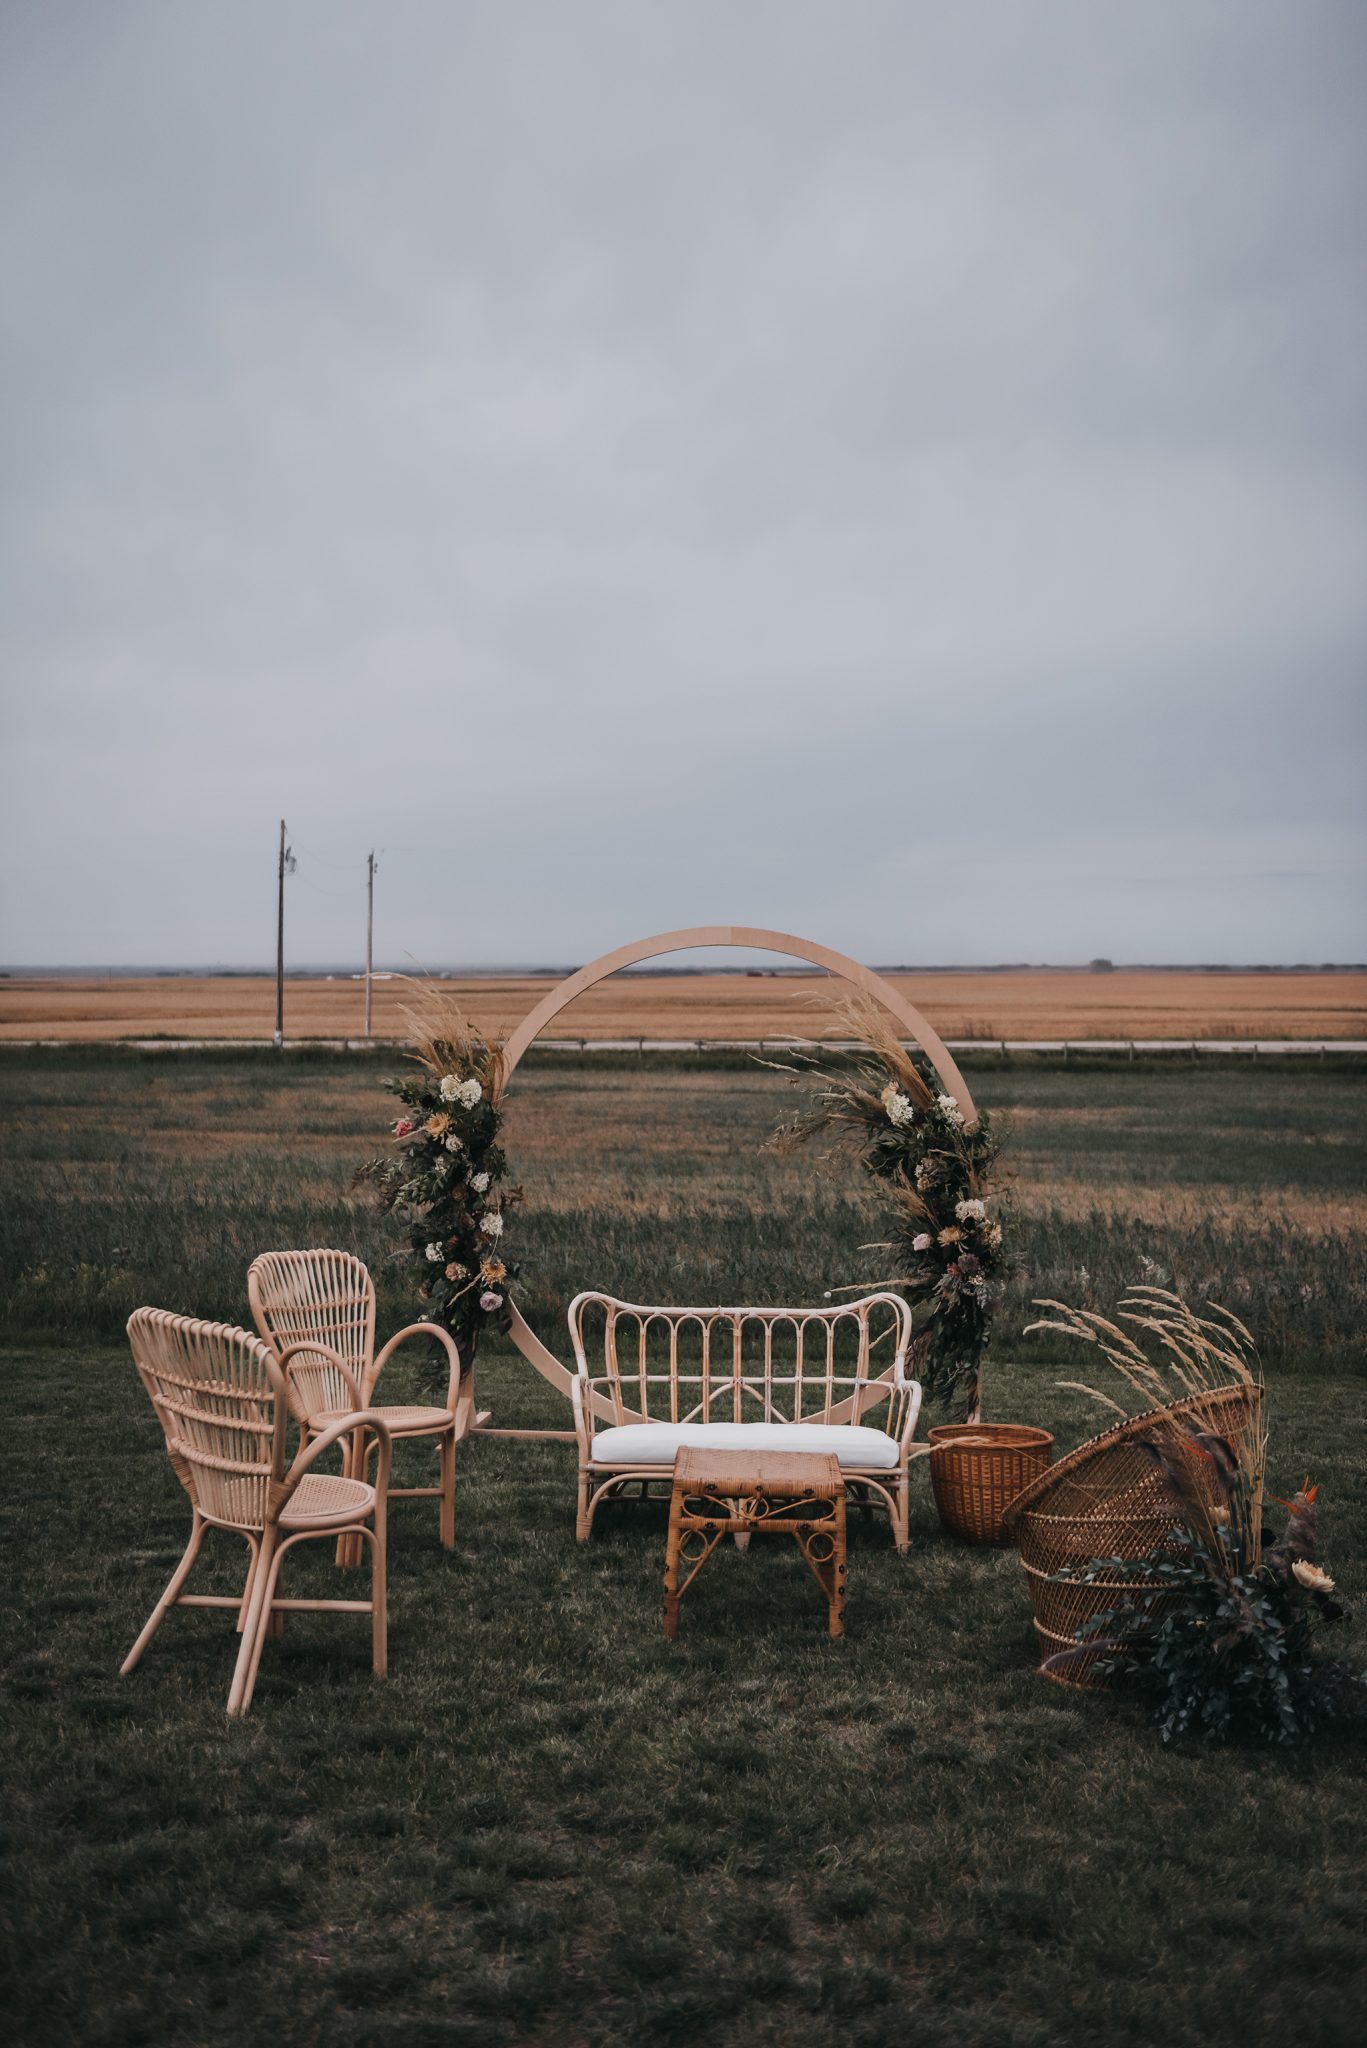 Real Wedding - Countryside Nuptials & Moroccan Styled Reception - featured on Junebug and Bronte Bride, moroccan decor and styling, outdoor fall wedding